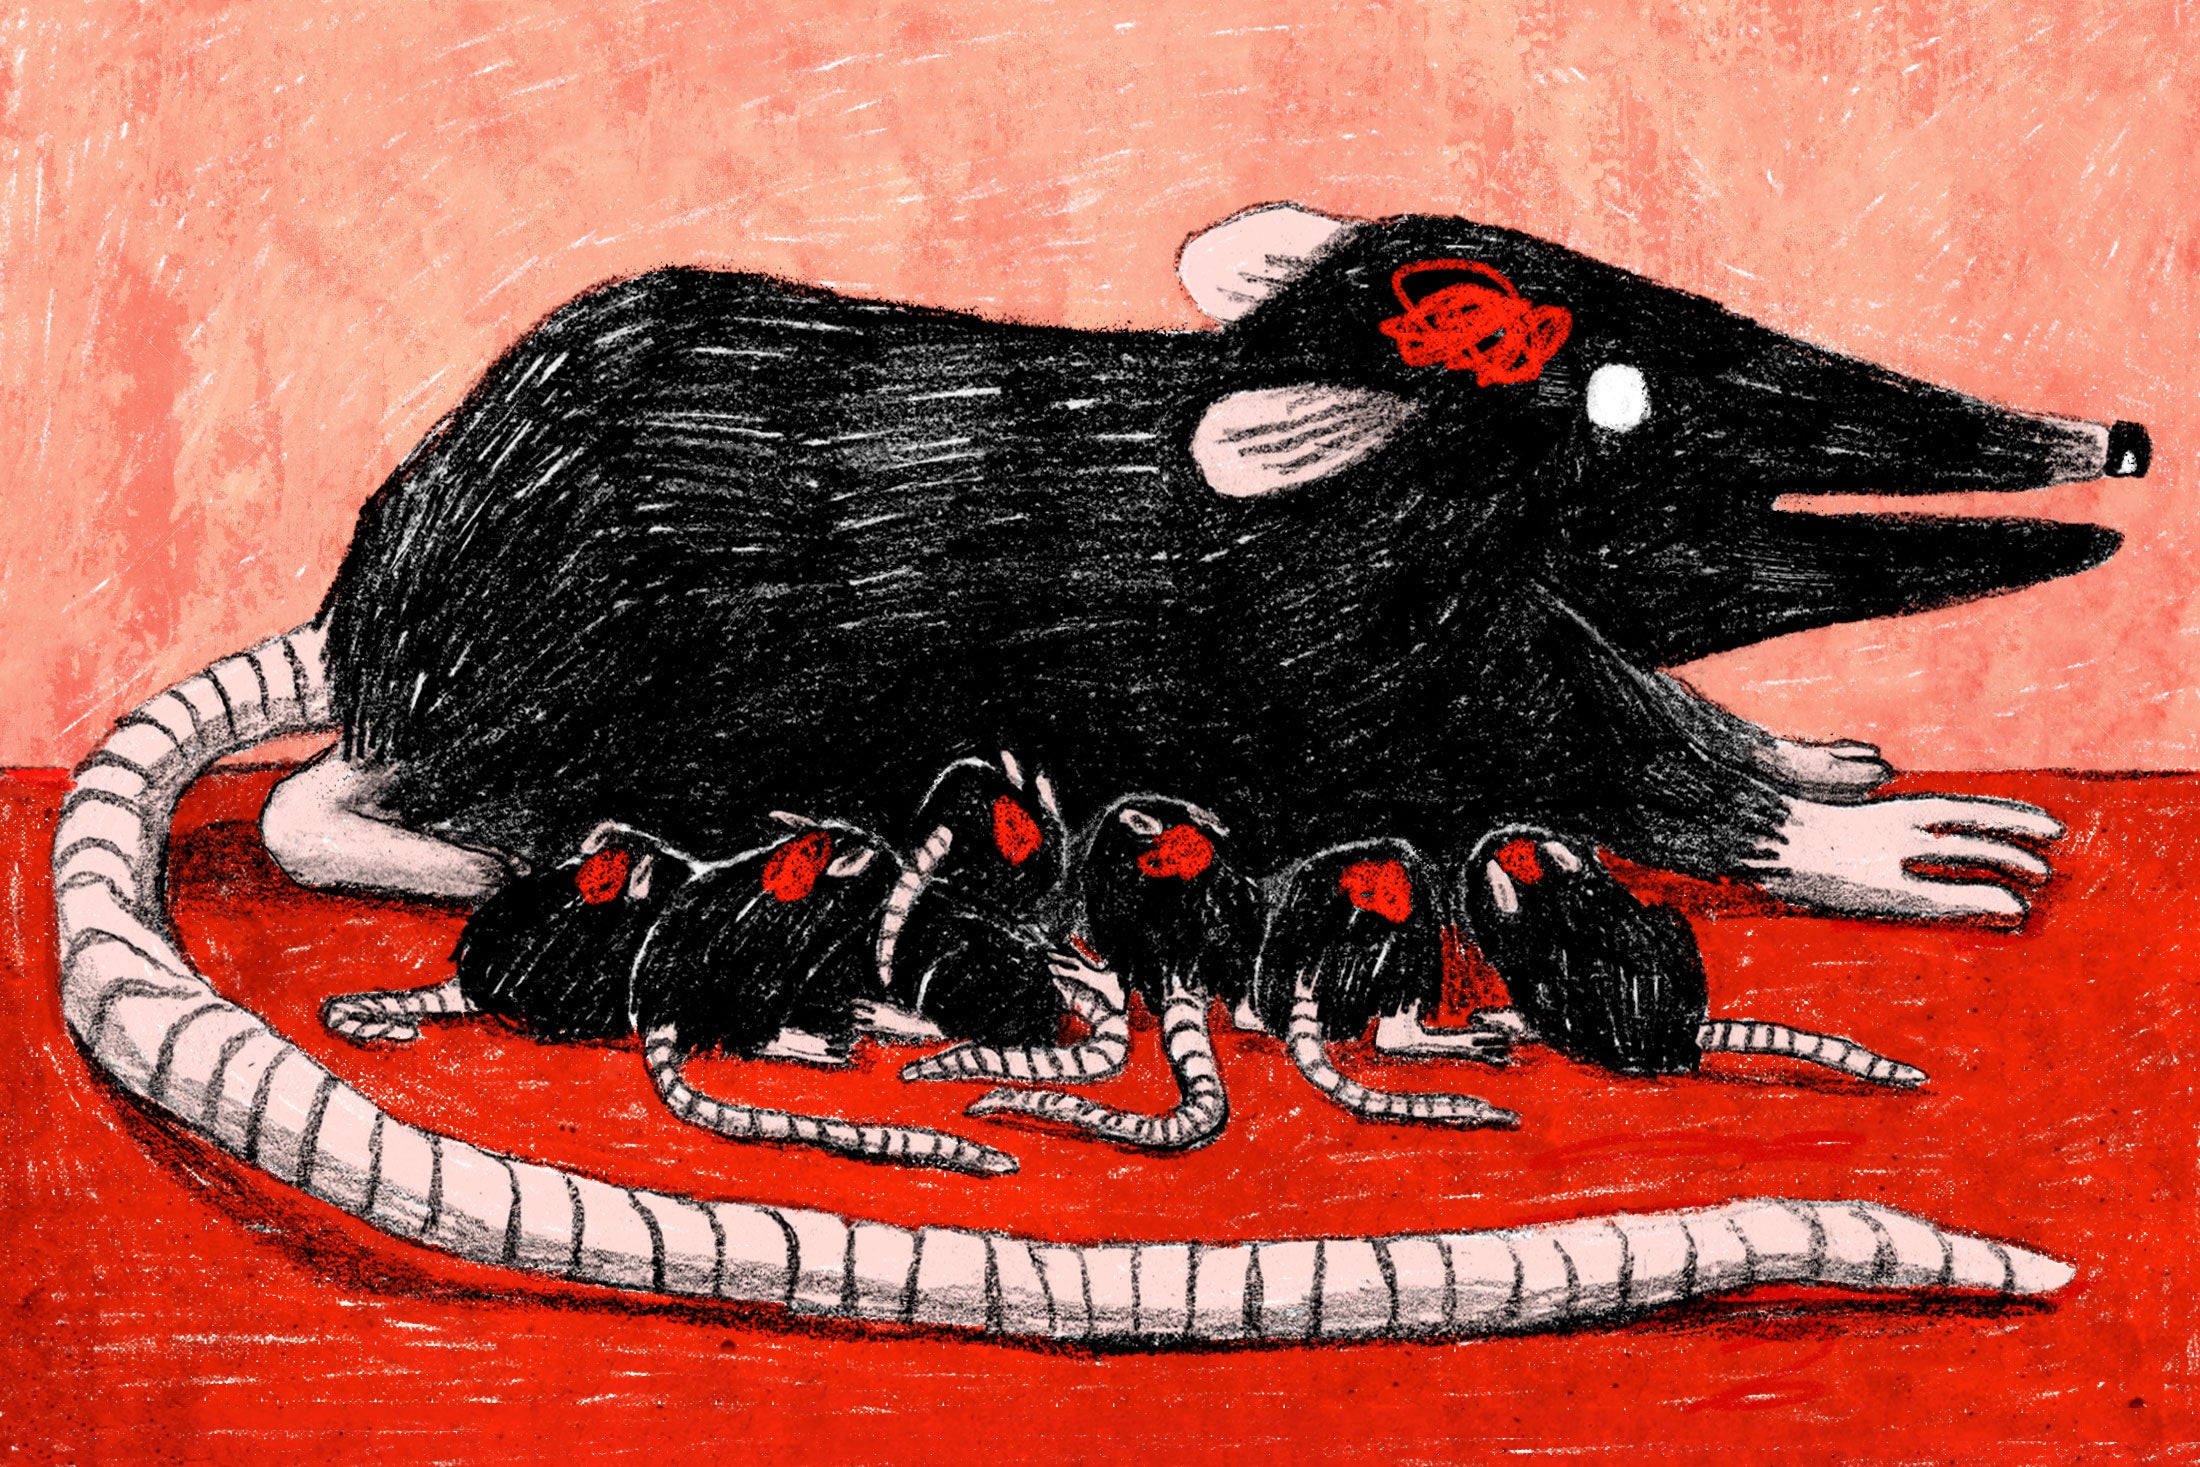 Illustration: Baby rats nurse from their mother, while a squiggle in the approximate location of their brains suggests that knowledge is passed down through their genetic line.